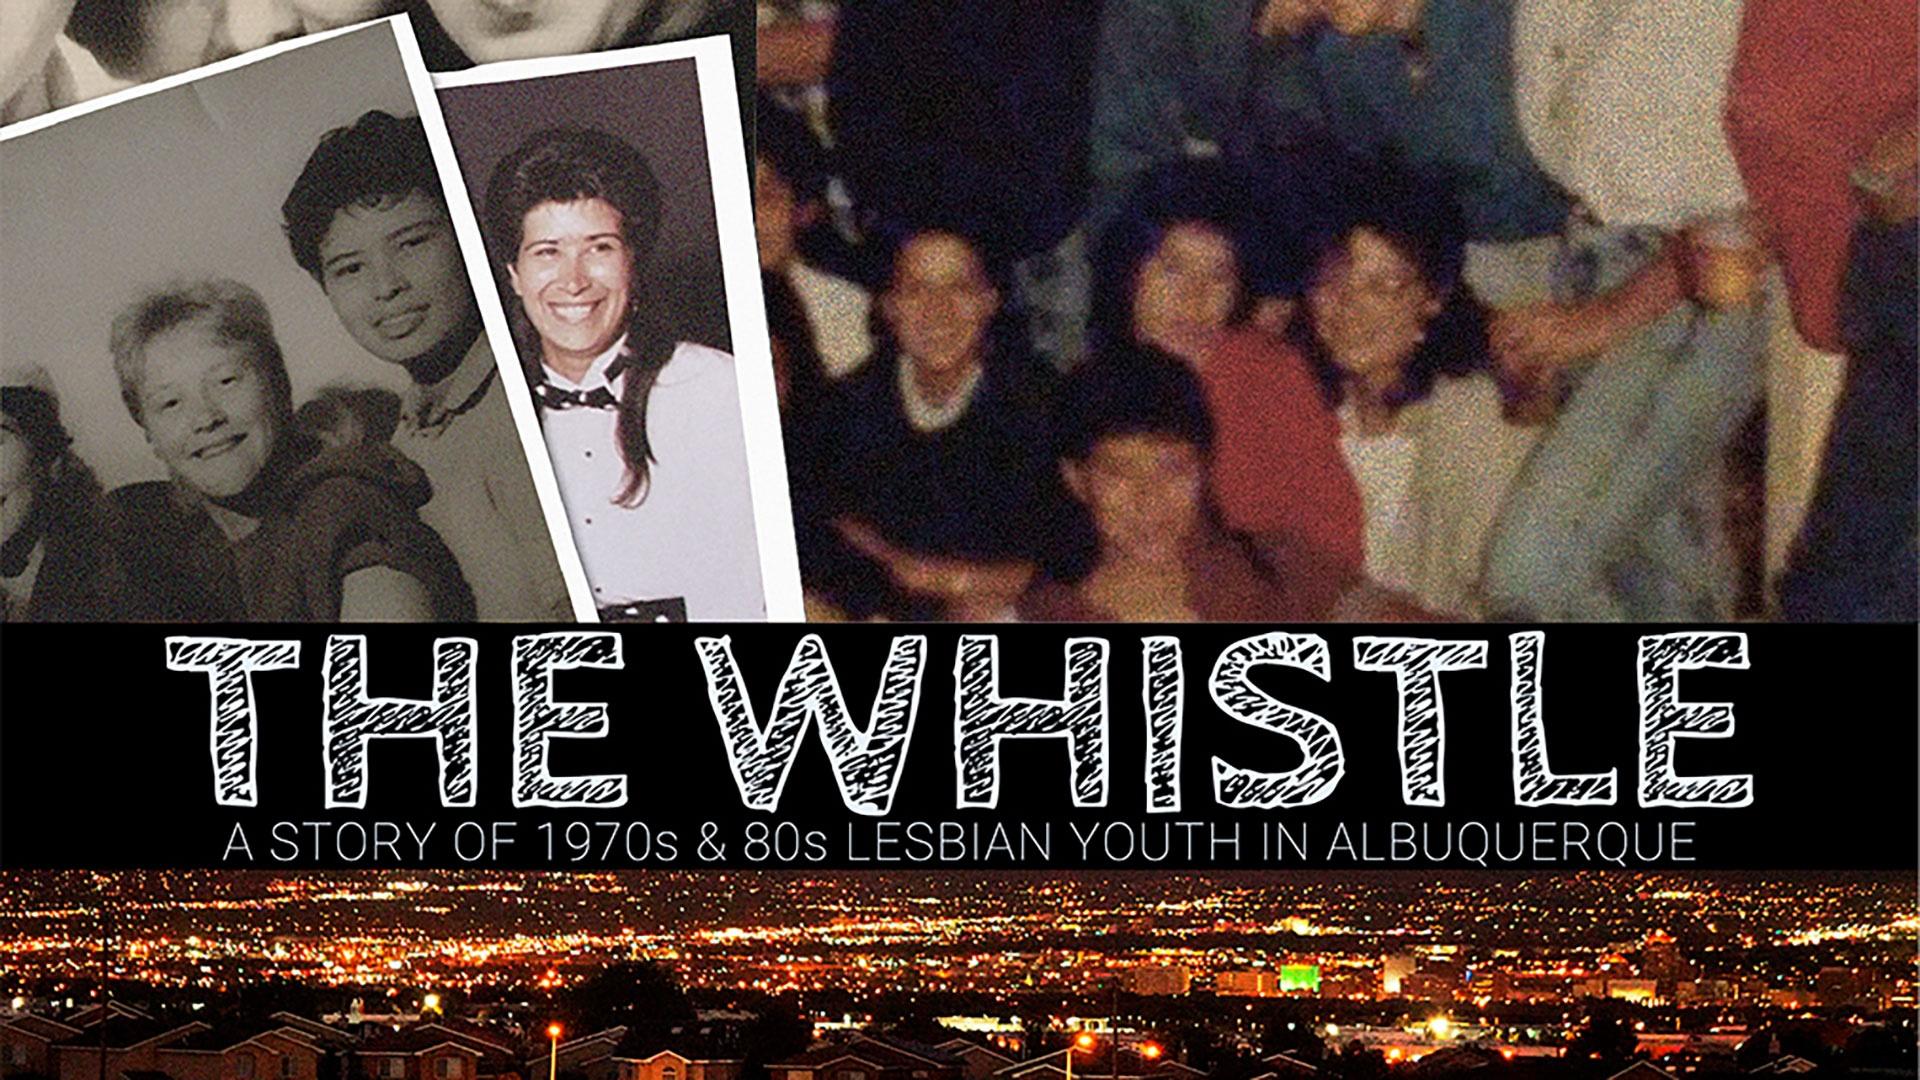 1980s first lesbian story